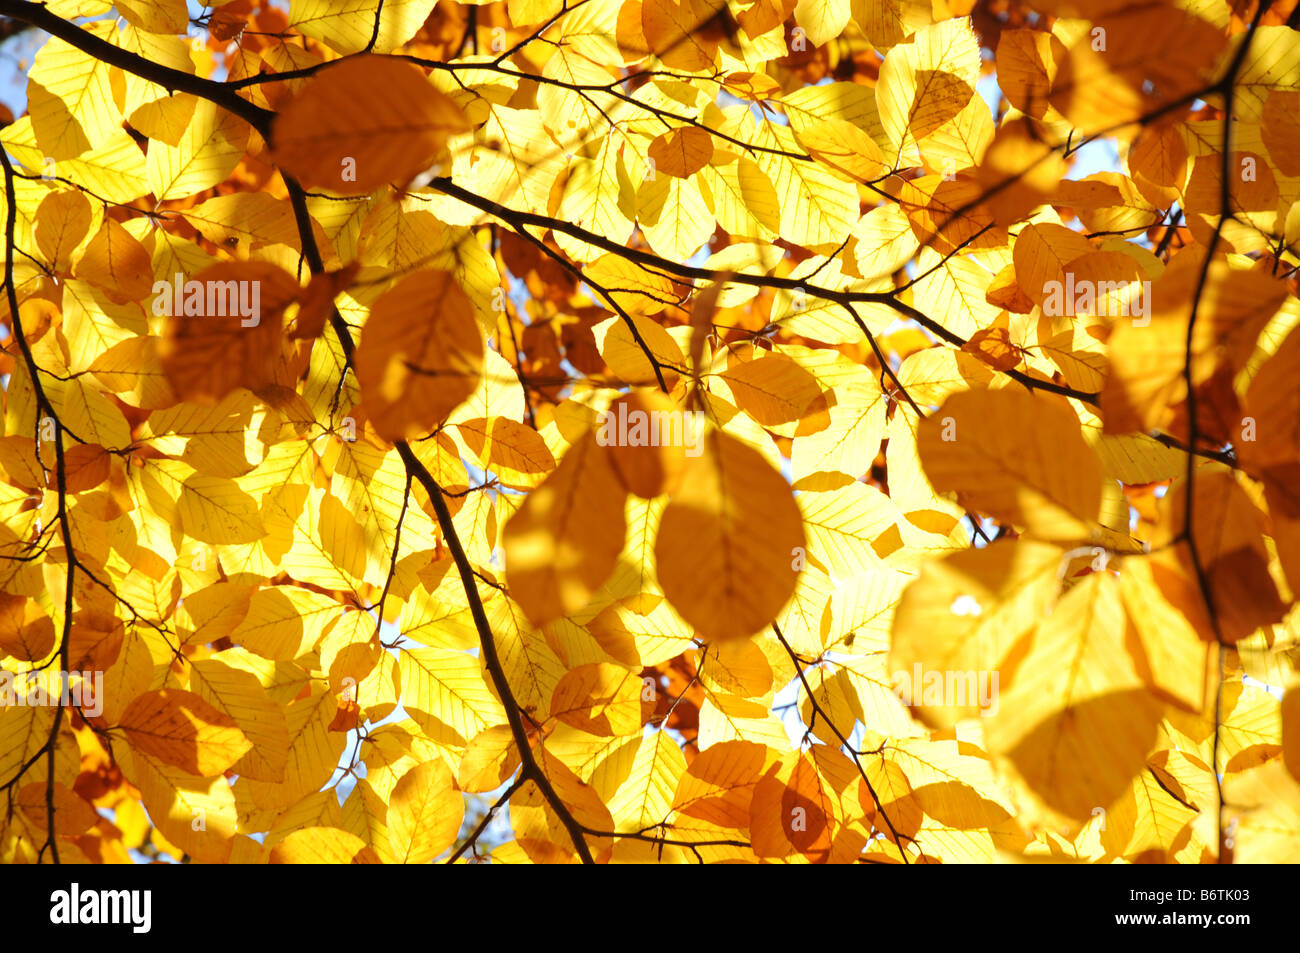 Yellow autumn leaves on a branch against sky backlit by sun. Stock Photo